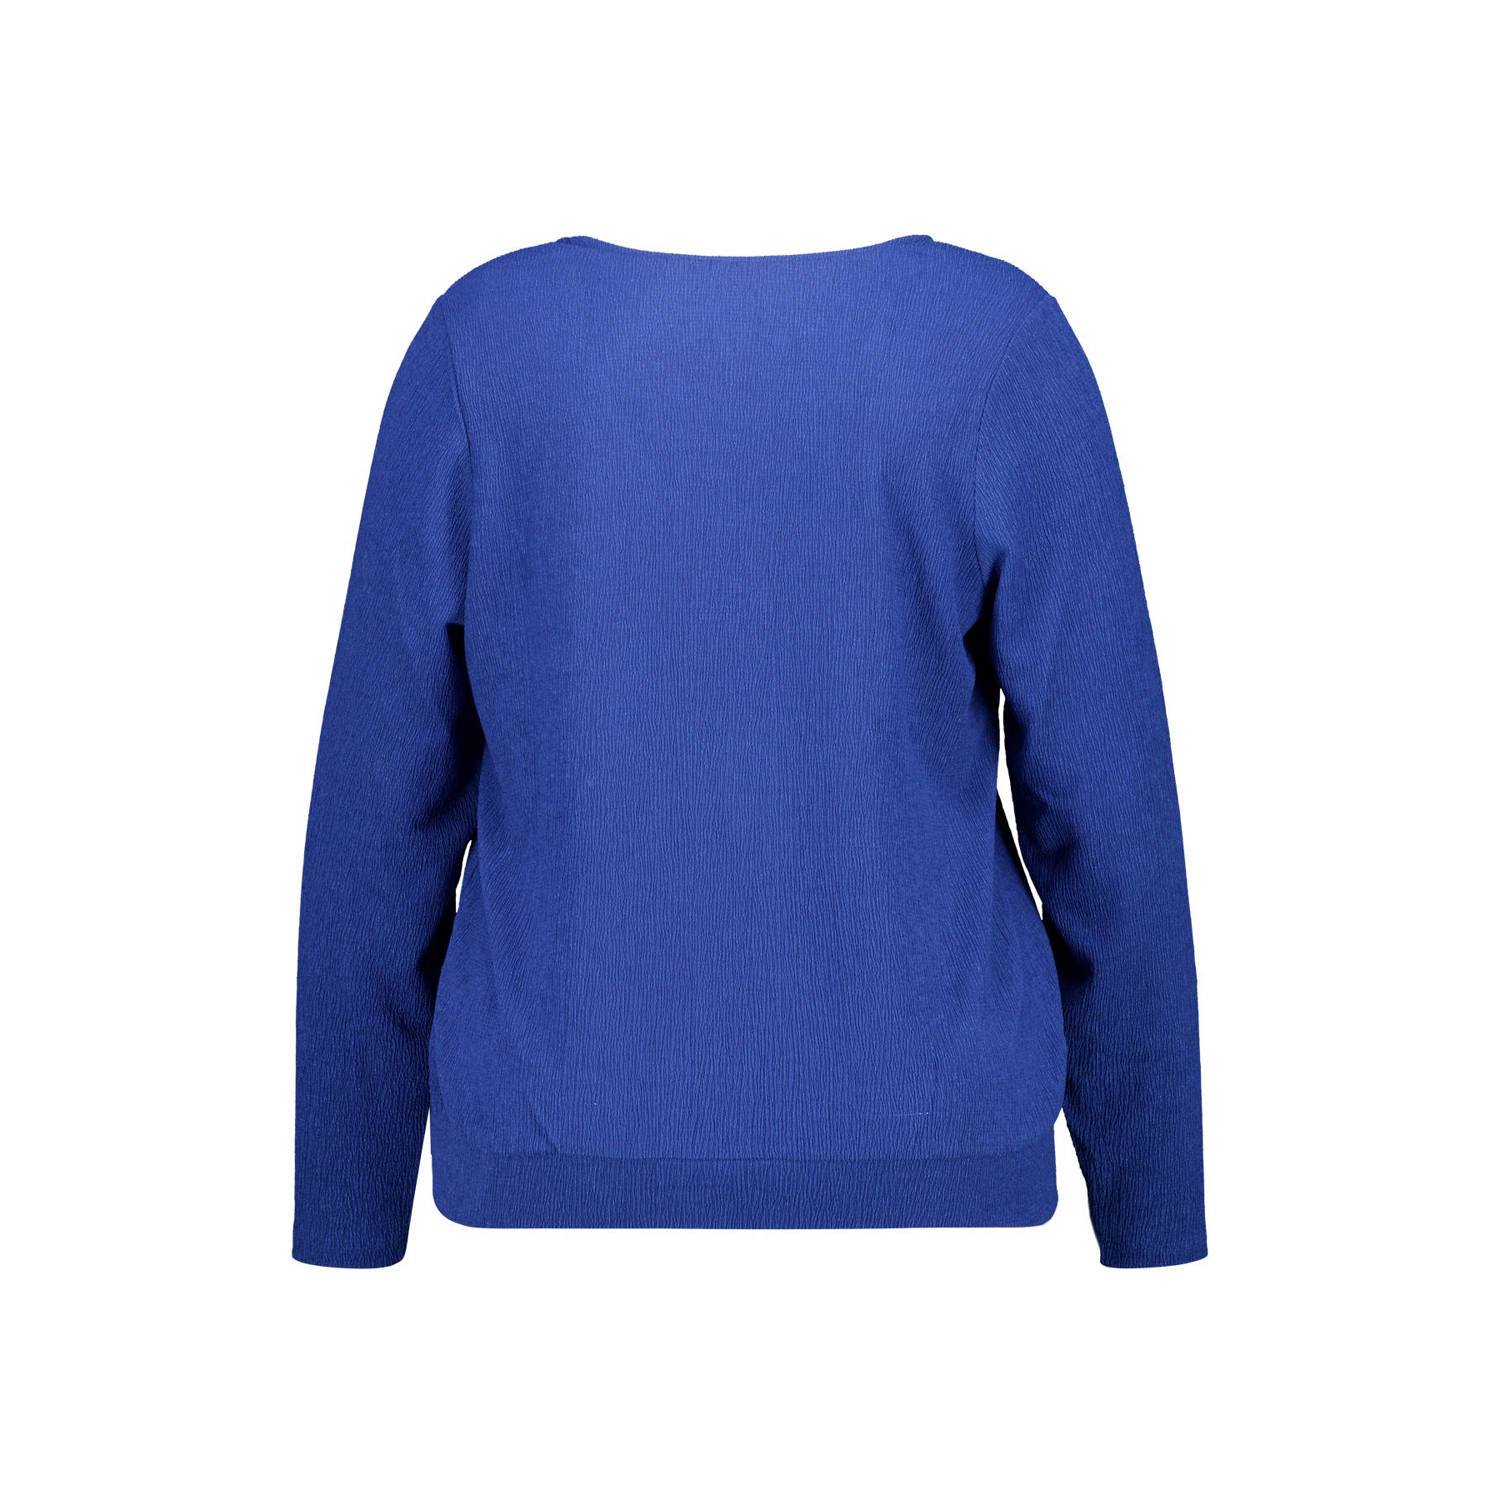 MS Mode top van gerecycled polyester blauw